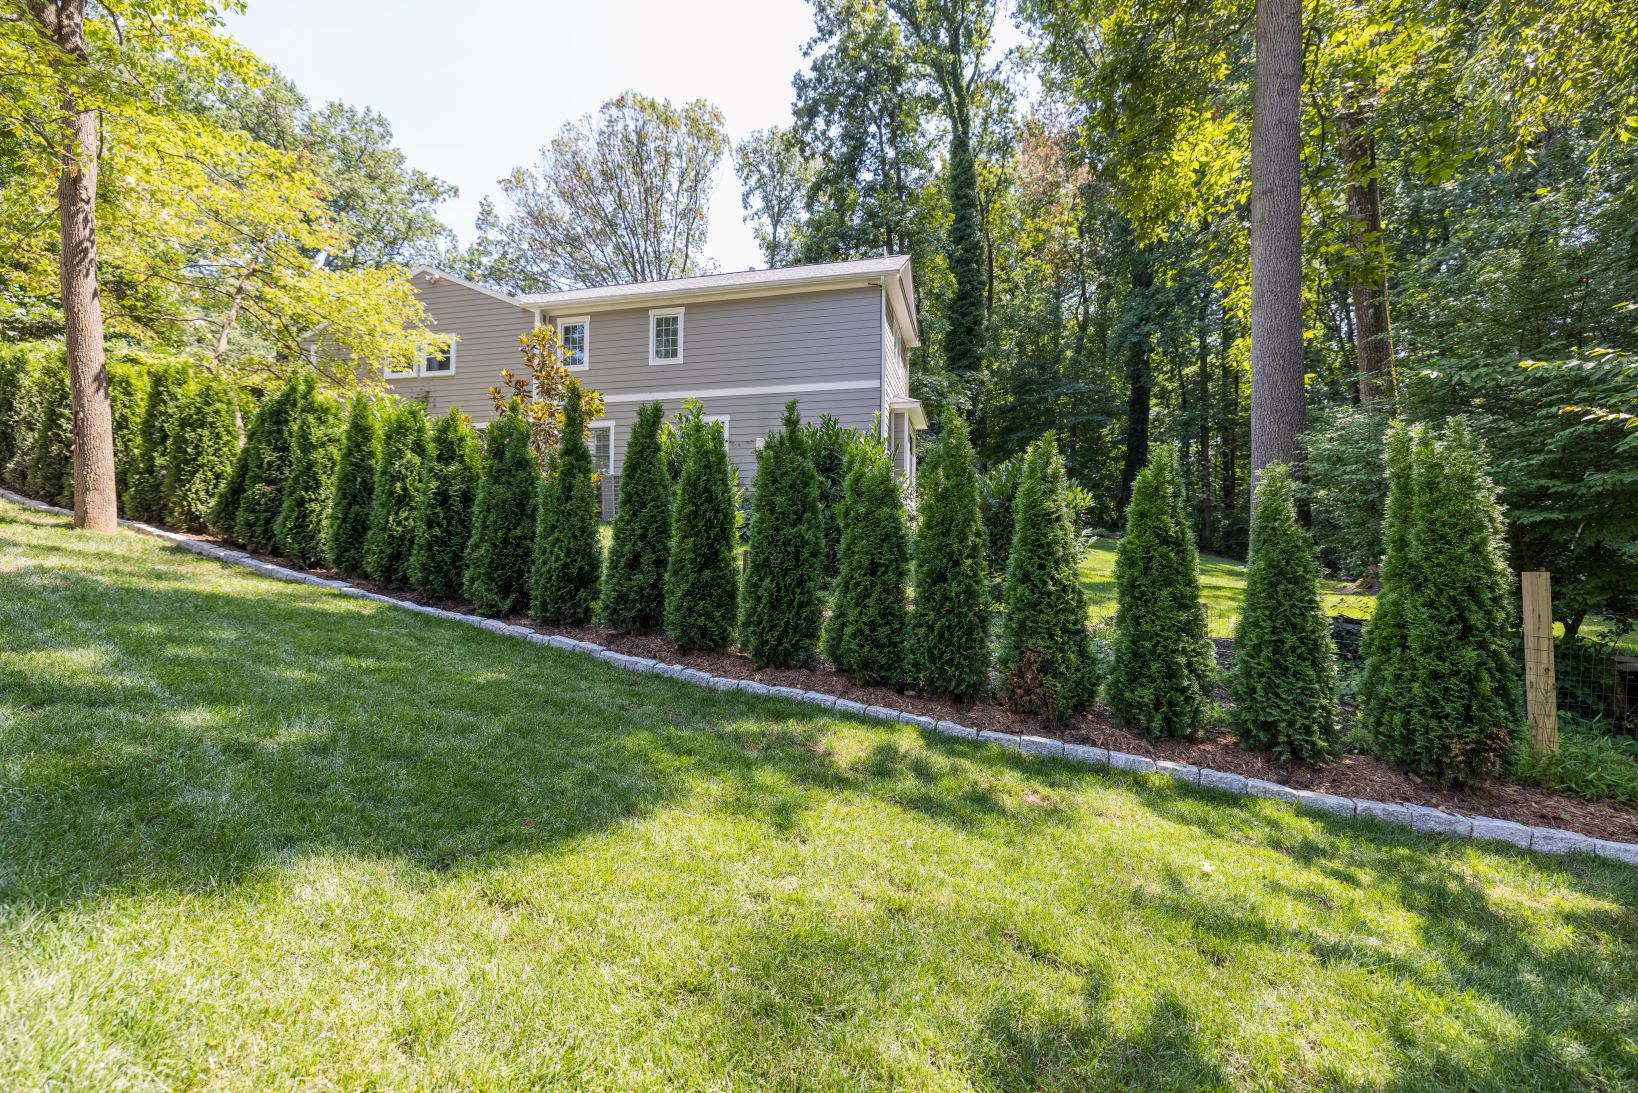 Landscaping Service Northern Virginia